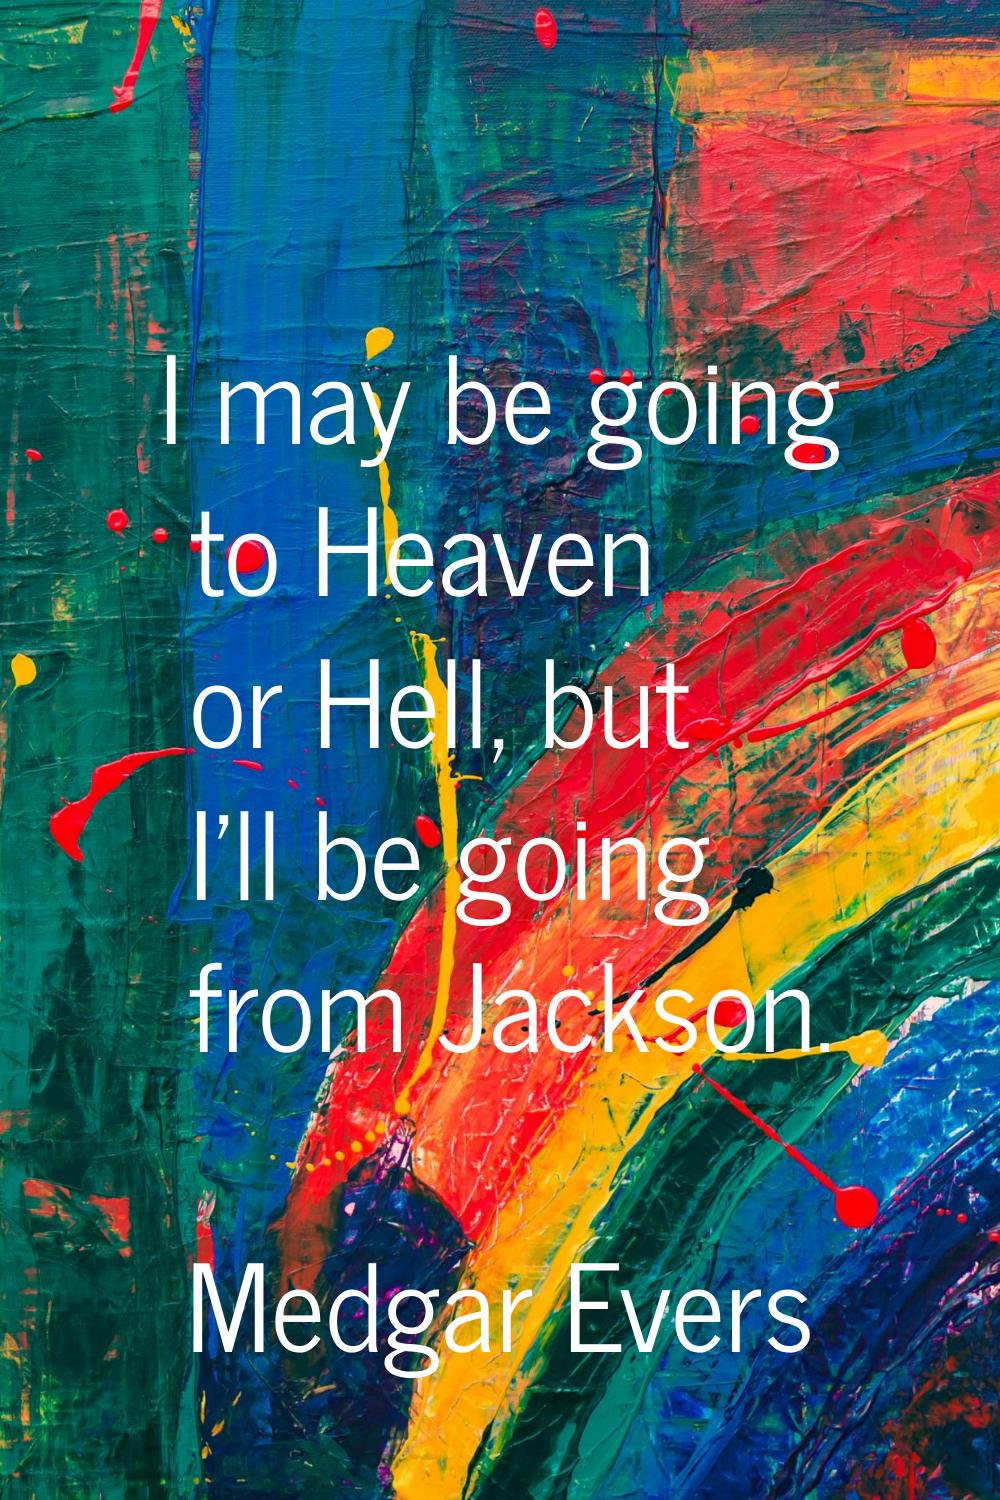 I may be going to Heaven or Hell, but I'll be going from Jackson.